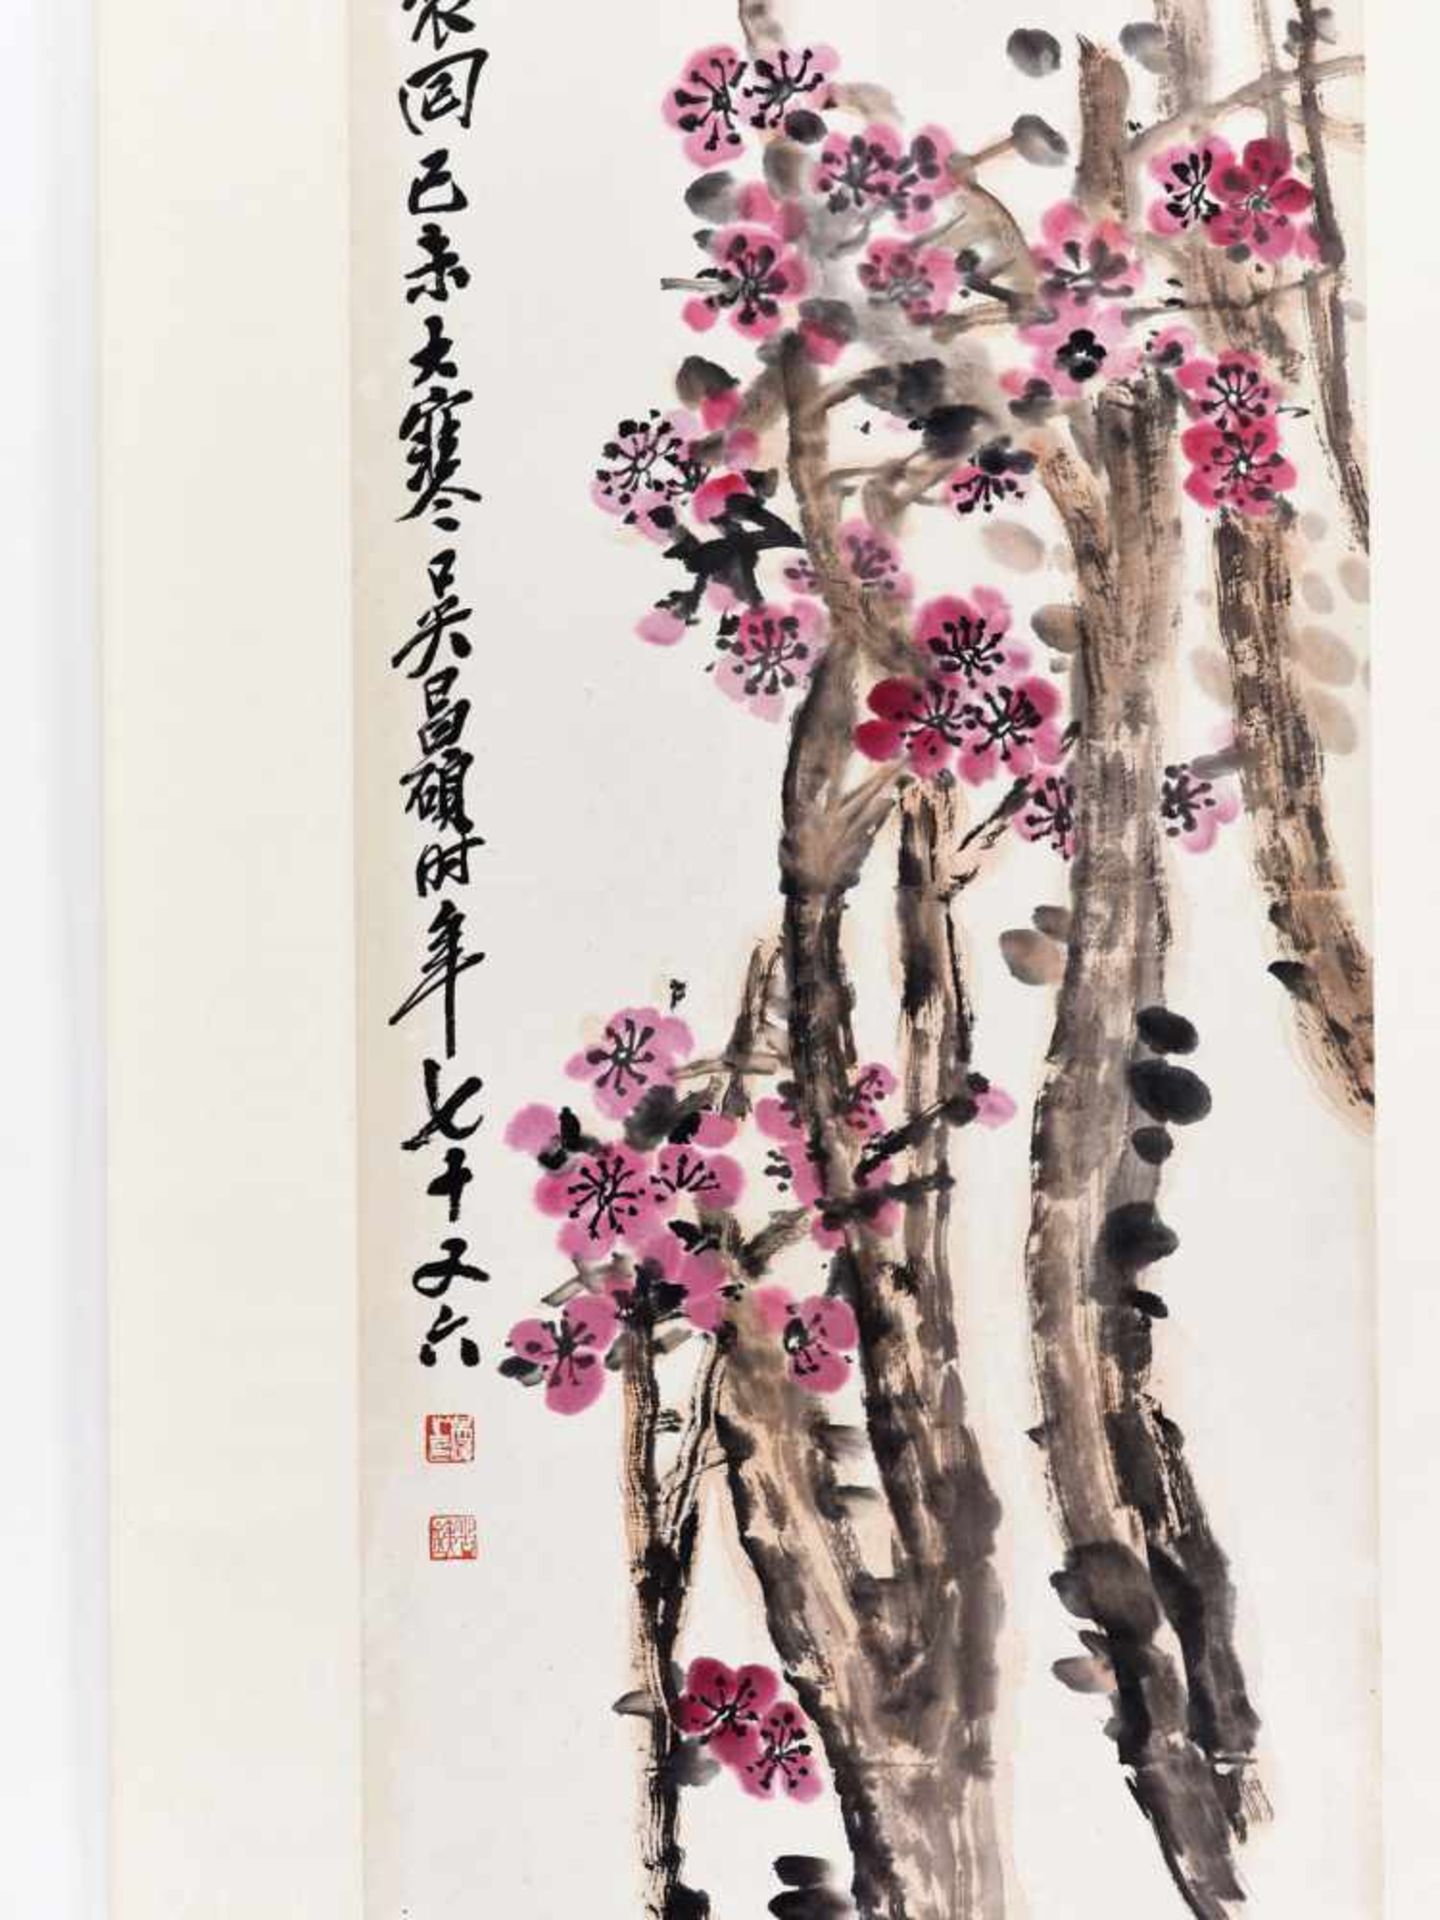 A ‘BLOOMING PLUM BLOSSOM BRANCHES’ PAINTING BY WU CHANGSHUO, DATED 1919 Ink and color on paper, - Image 3 of 5